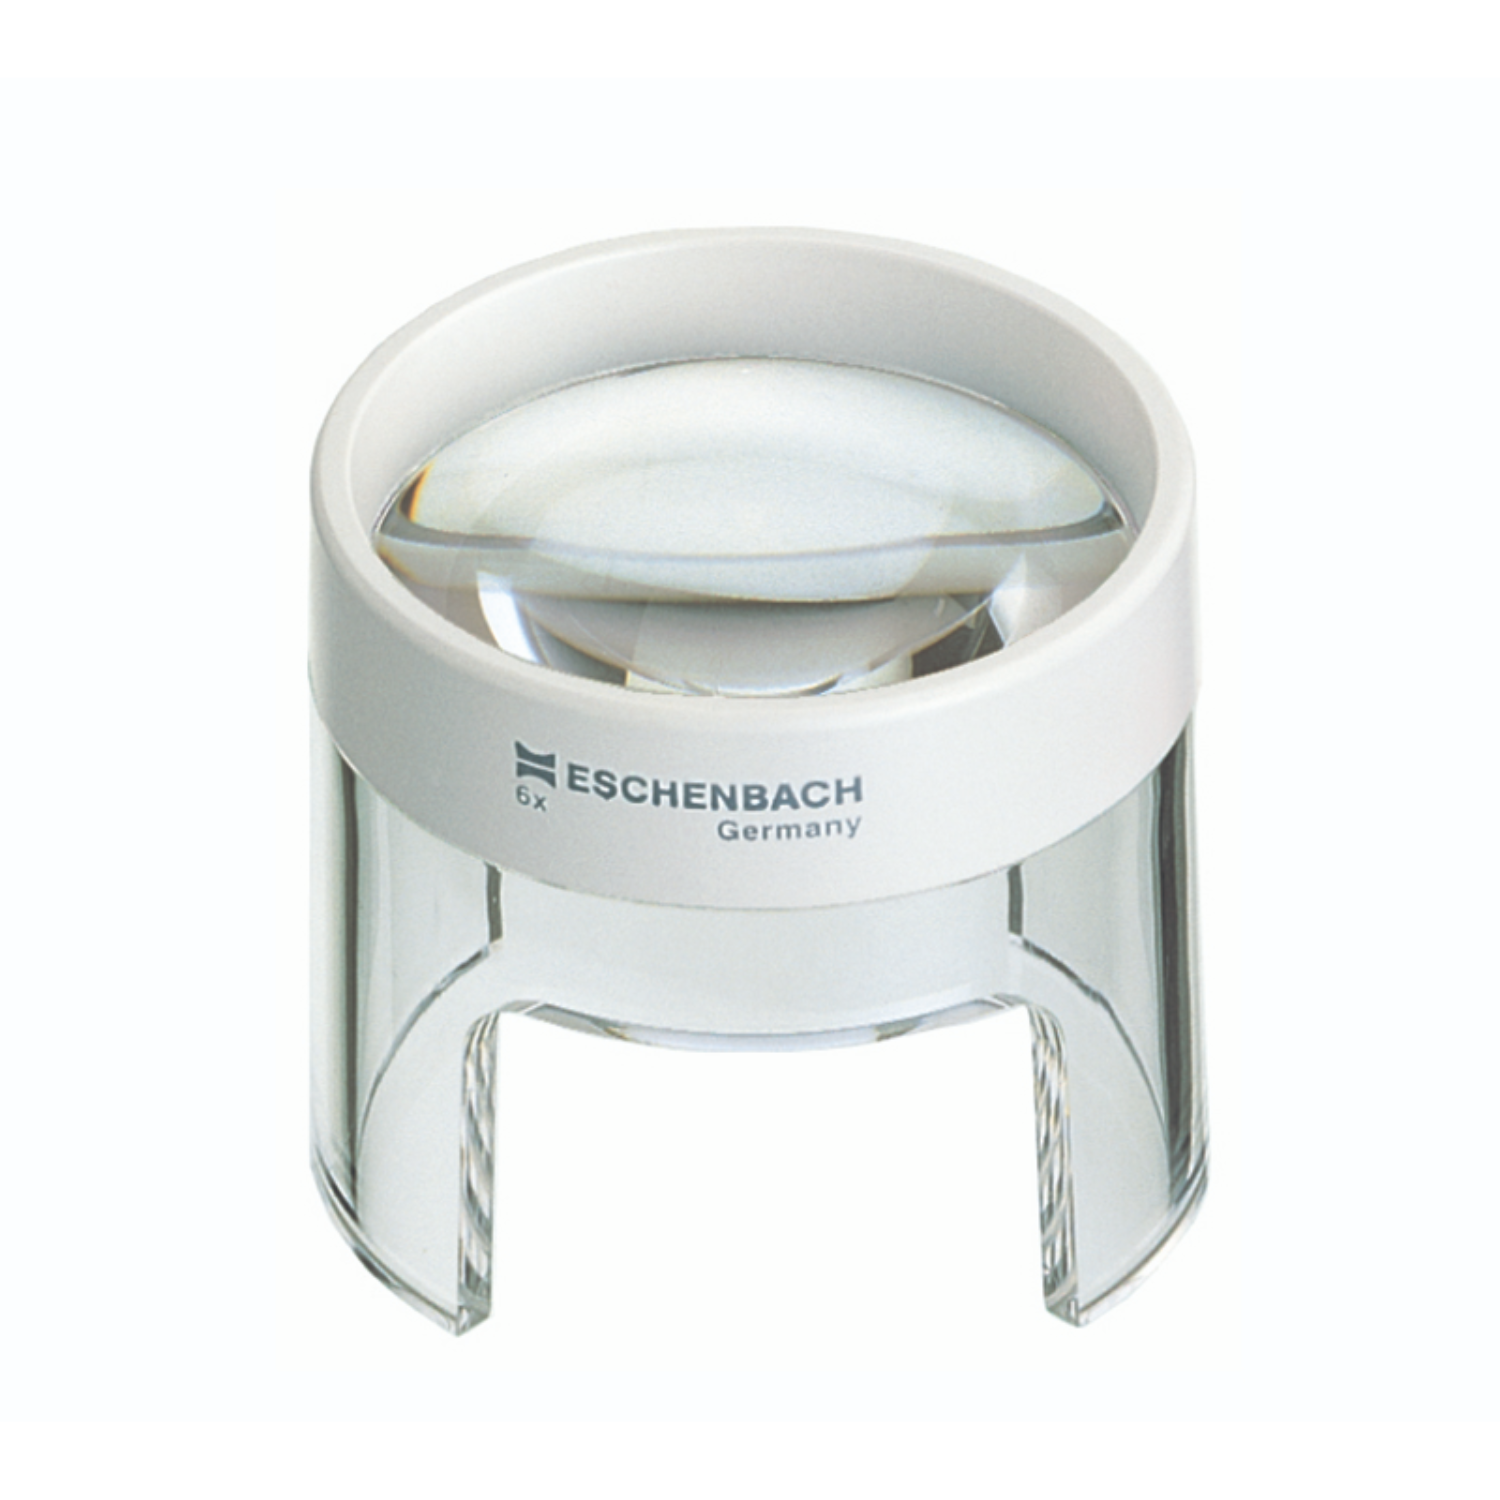 Image of the Eschenbach 6x Stand Magnifier with Clear Base.